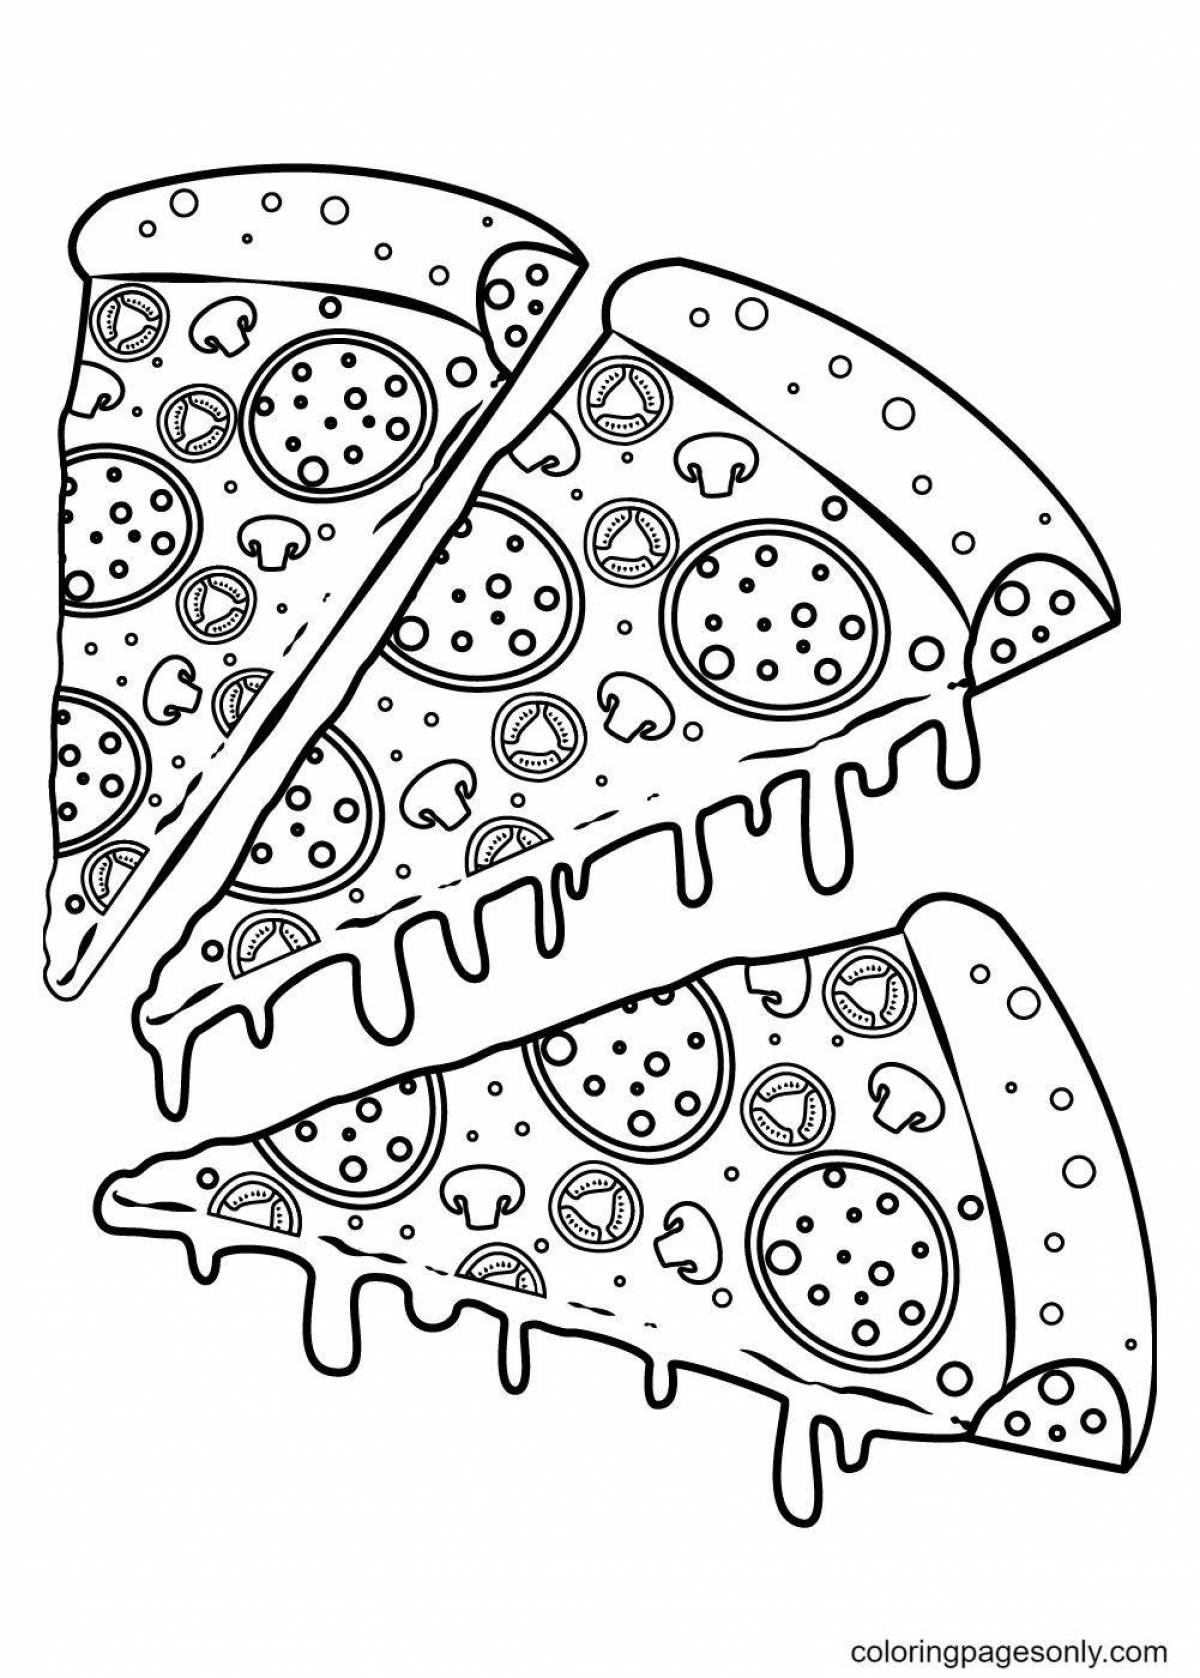 Charming pizza slice coloring book